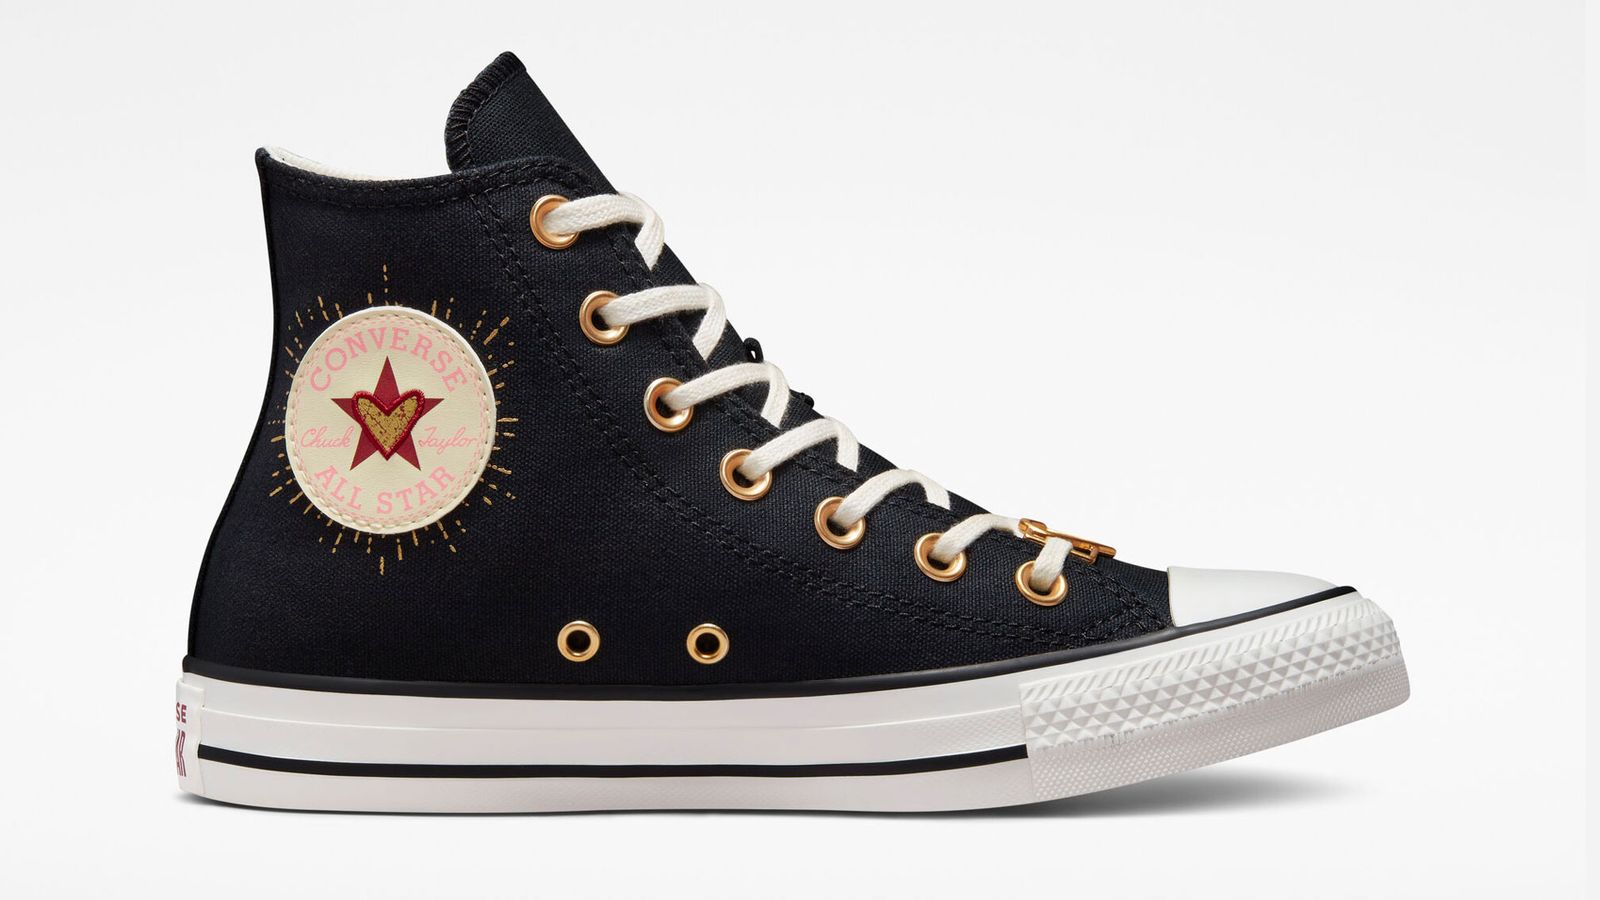 Best sneakers for Valentine's Day - Converse Chuck Taylor All Star "Hearts" product image of a Black and White high-top with Gold and Red heart accents.